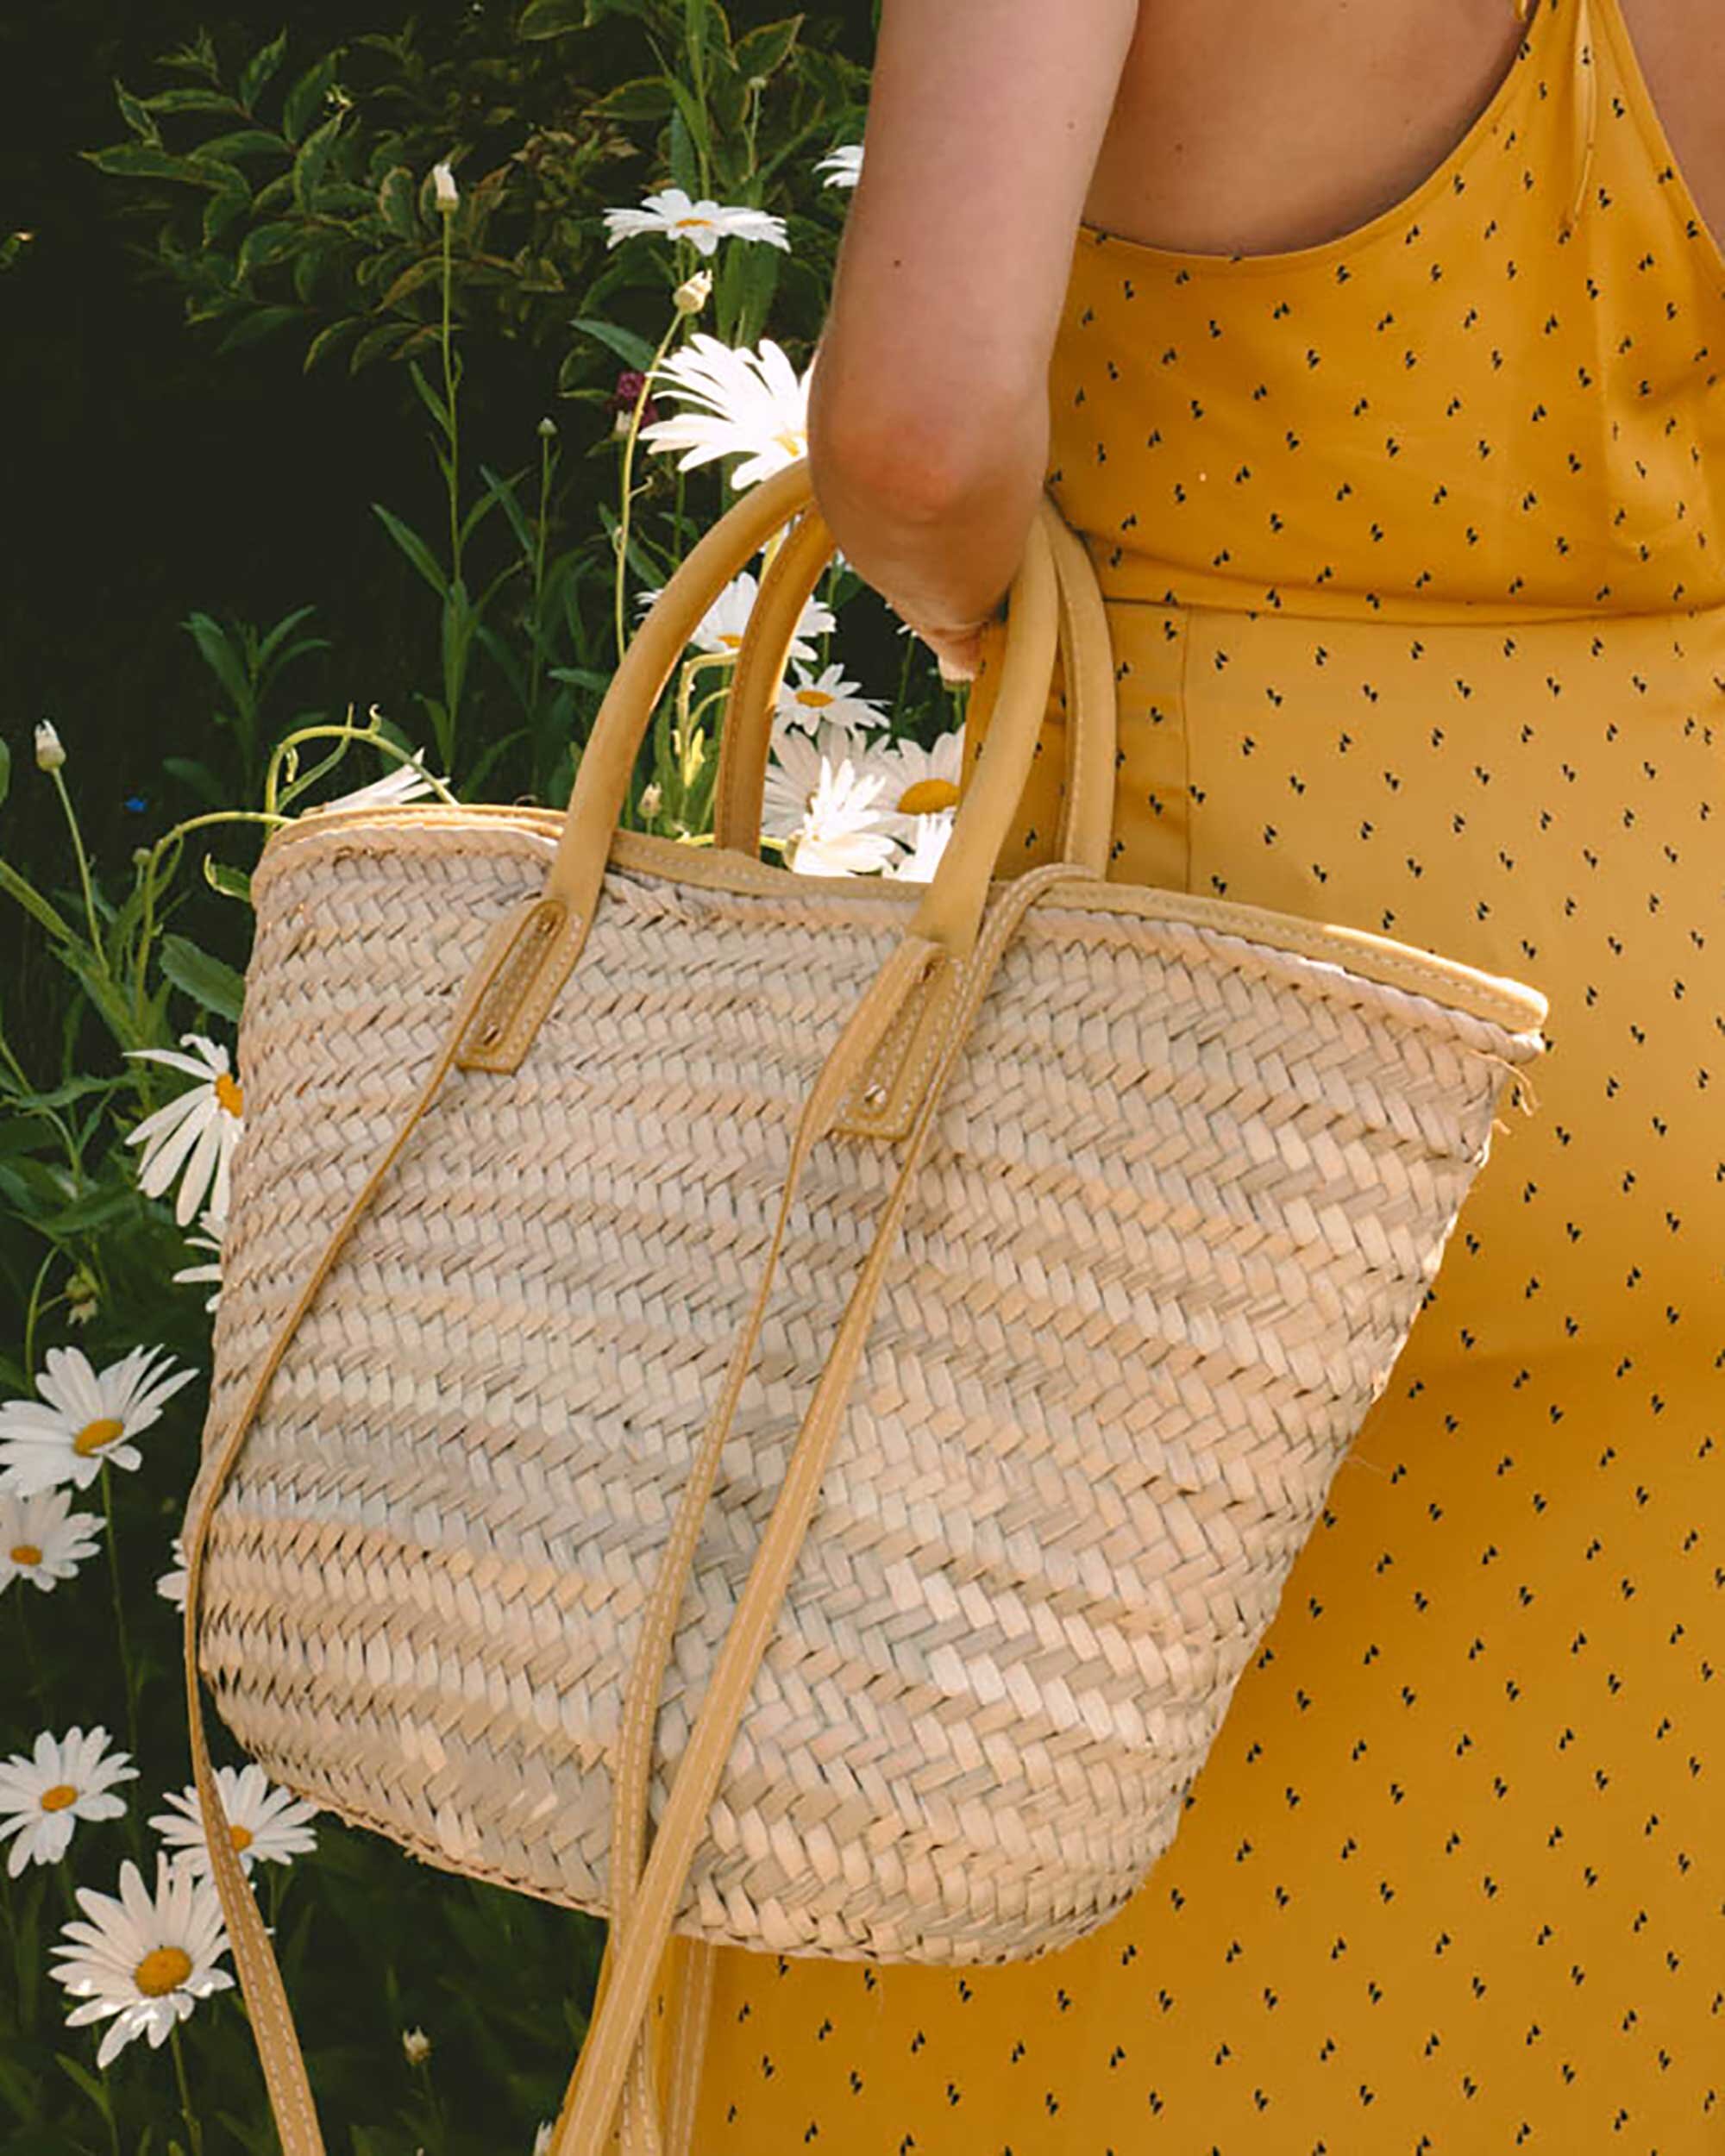 Easy Summer Outfit Idea. Sarah Butler of @sarahchristine wearing BCBG Yellow Satin Polka-Dot Skirt and Yellow Satin Tank Top with Jacquemus Le panier Soleil woven straw tote bag in Seattle, Washington --2.jpg